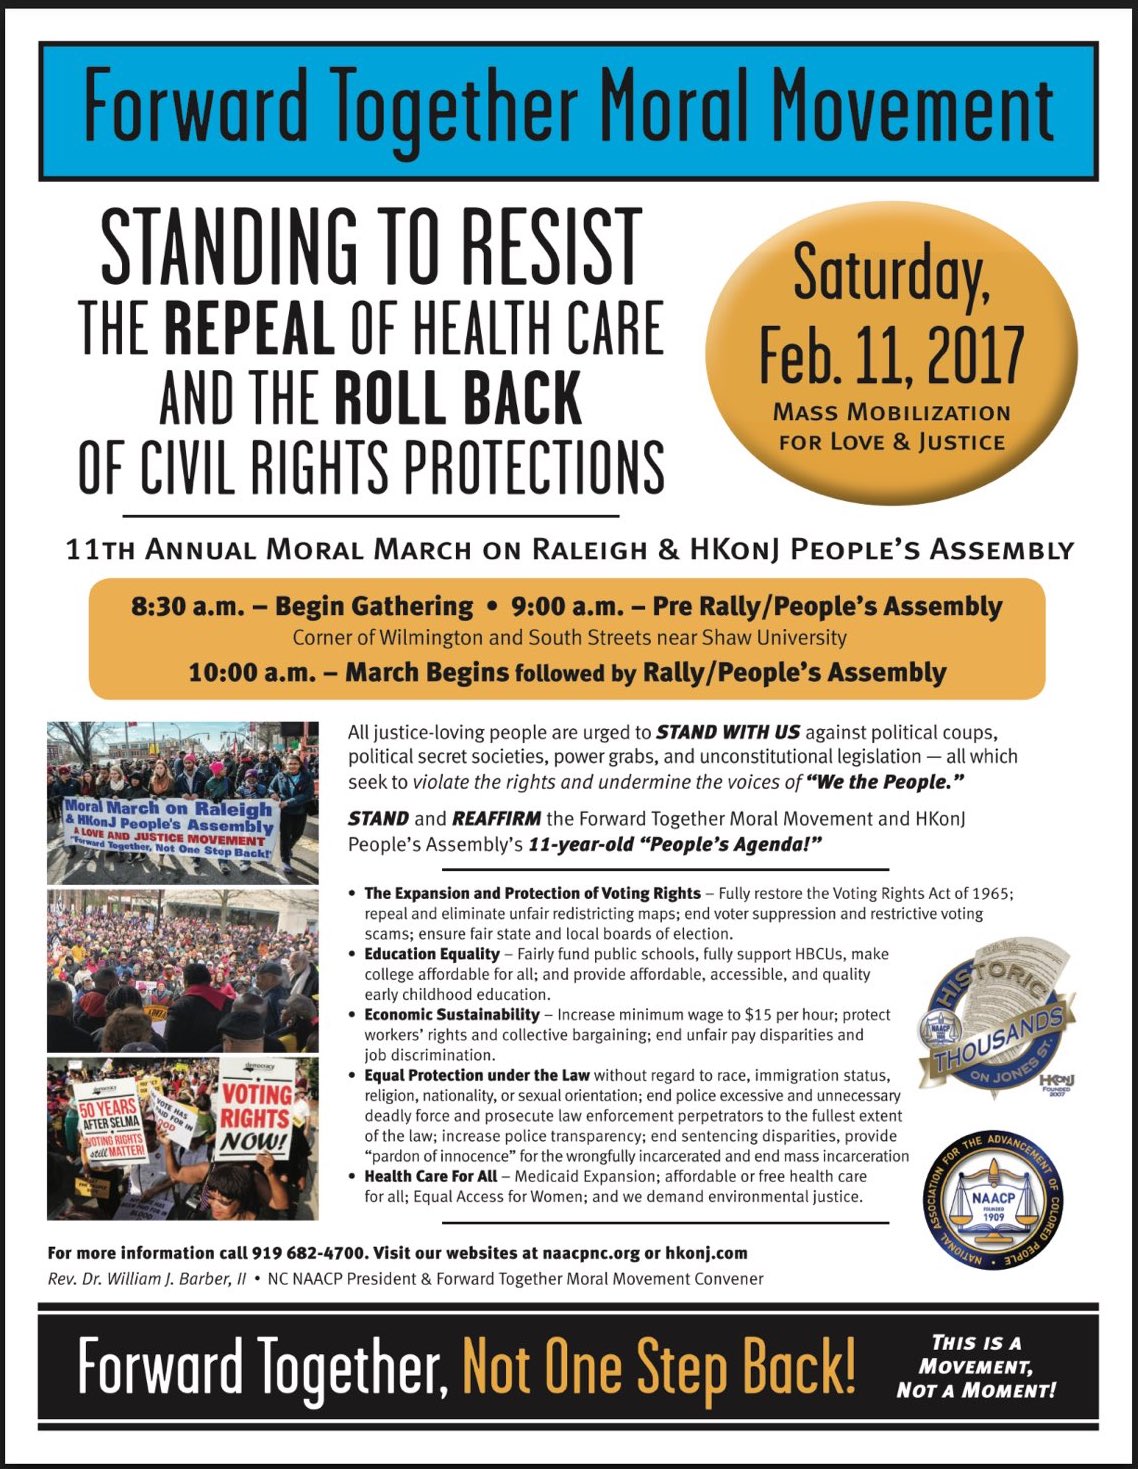 11th Annual Moral March on Raleigh